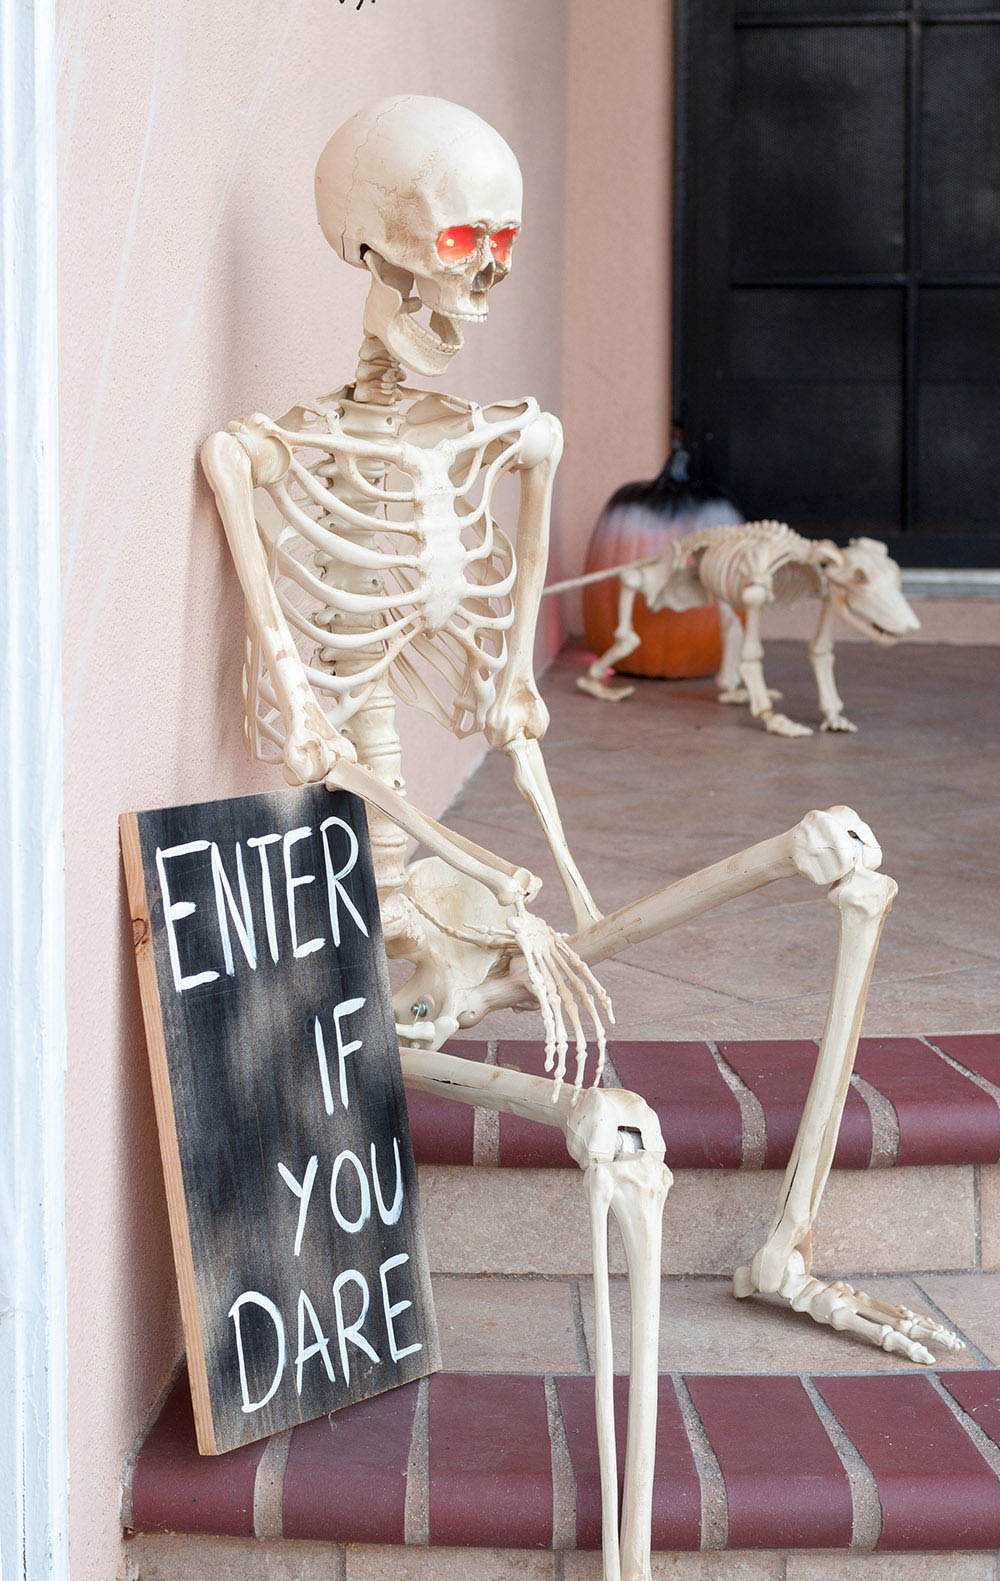 A skeleton sits next to an enter if you dare sign.